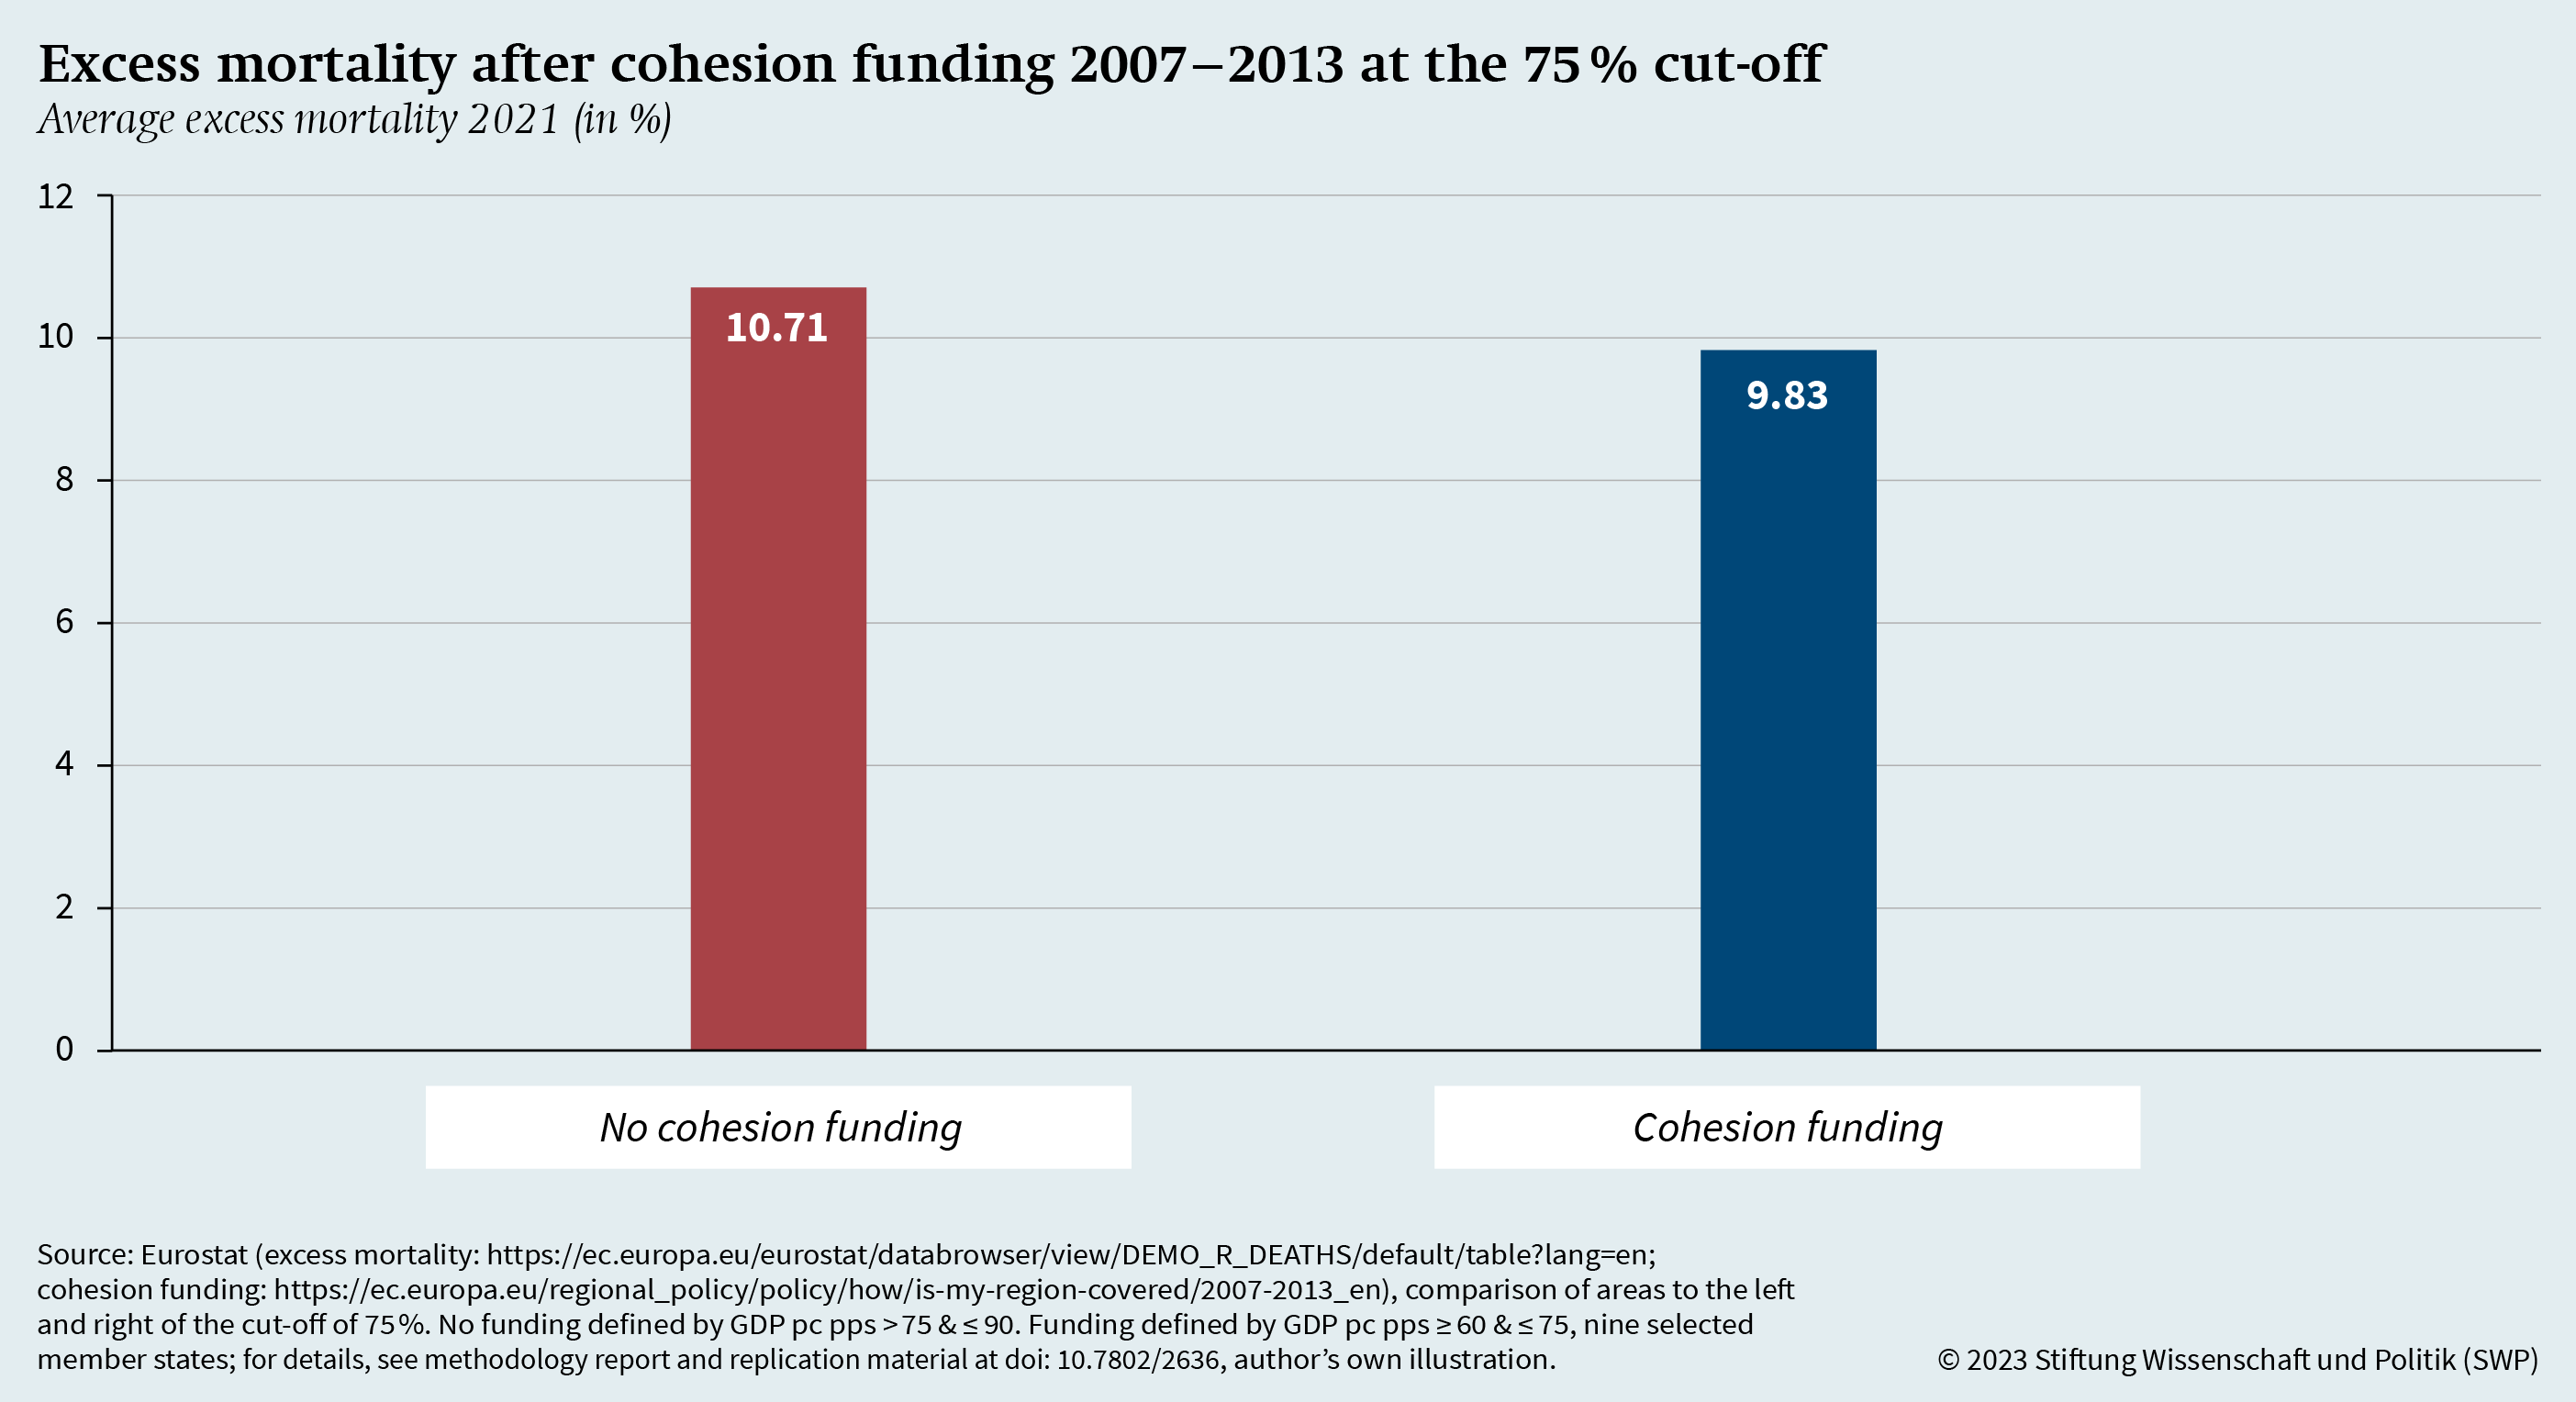 Figure 14: Excess mortality after cohesion funding 2007–2013 at the 75% cut-off